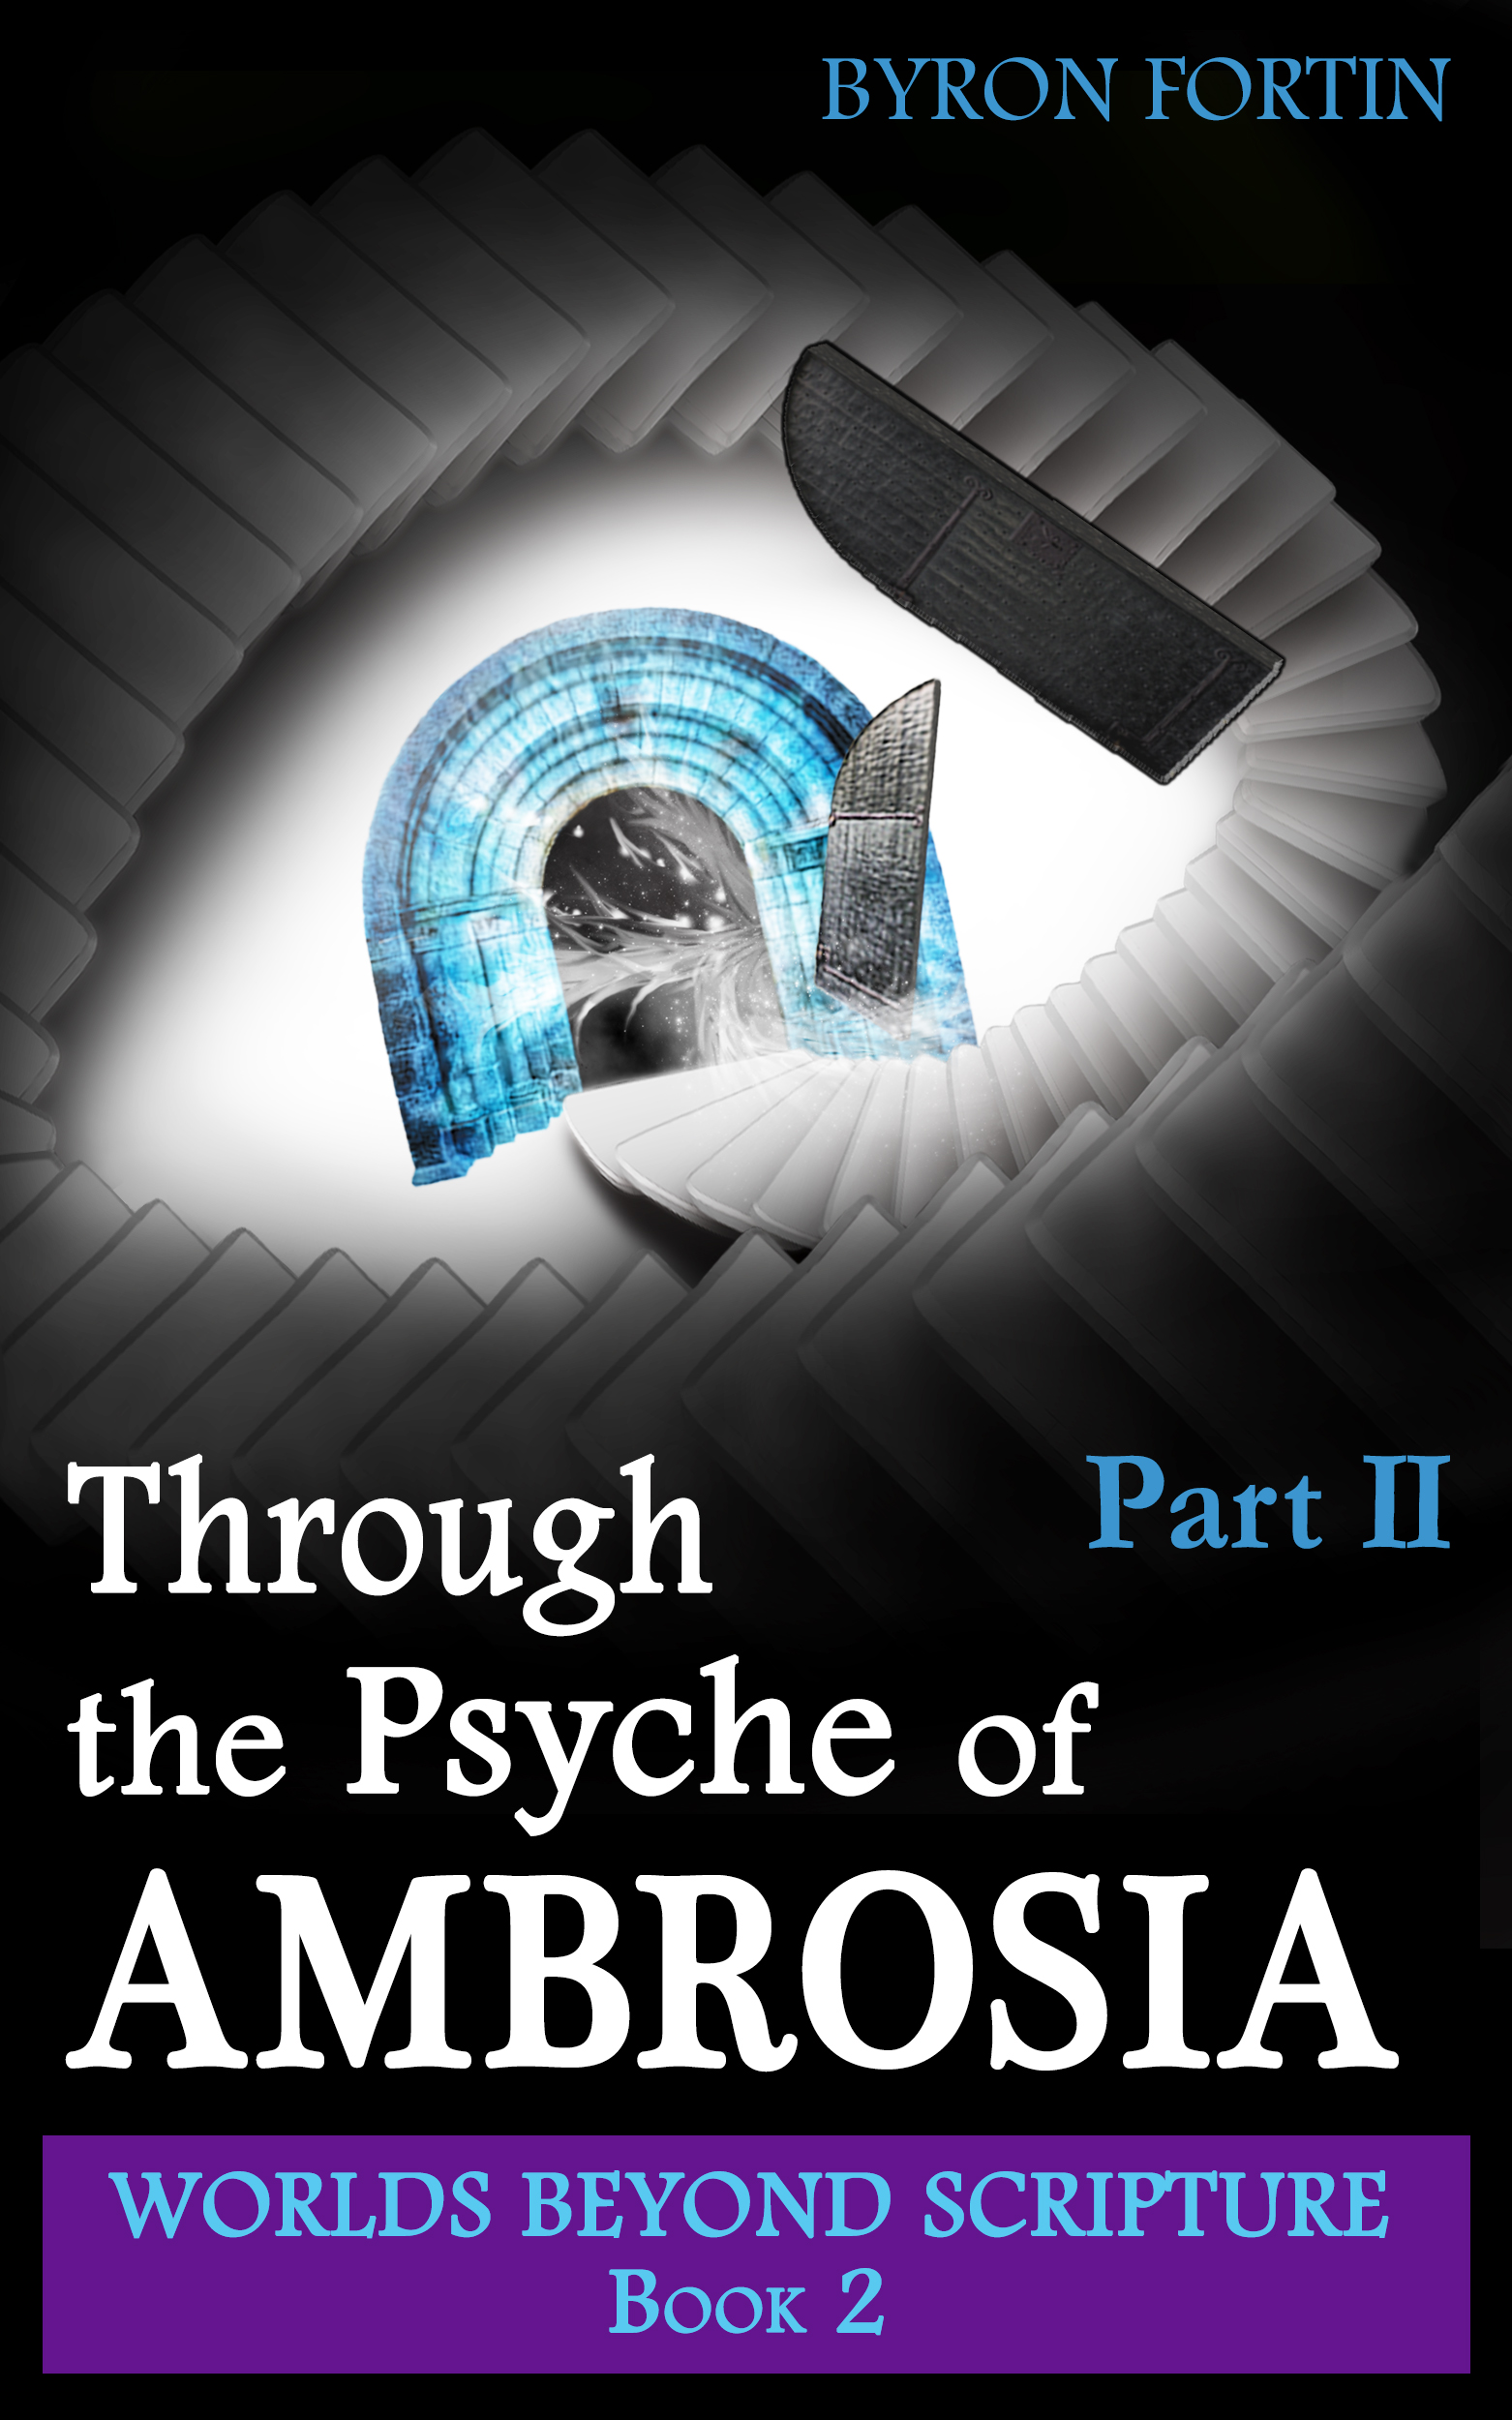 FREE: Through the Psyche of Ambrosia: Part II by Byron Fortin